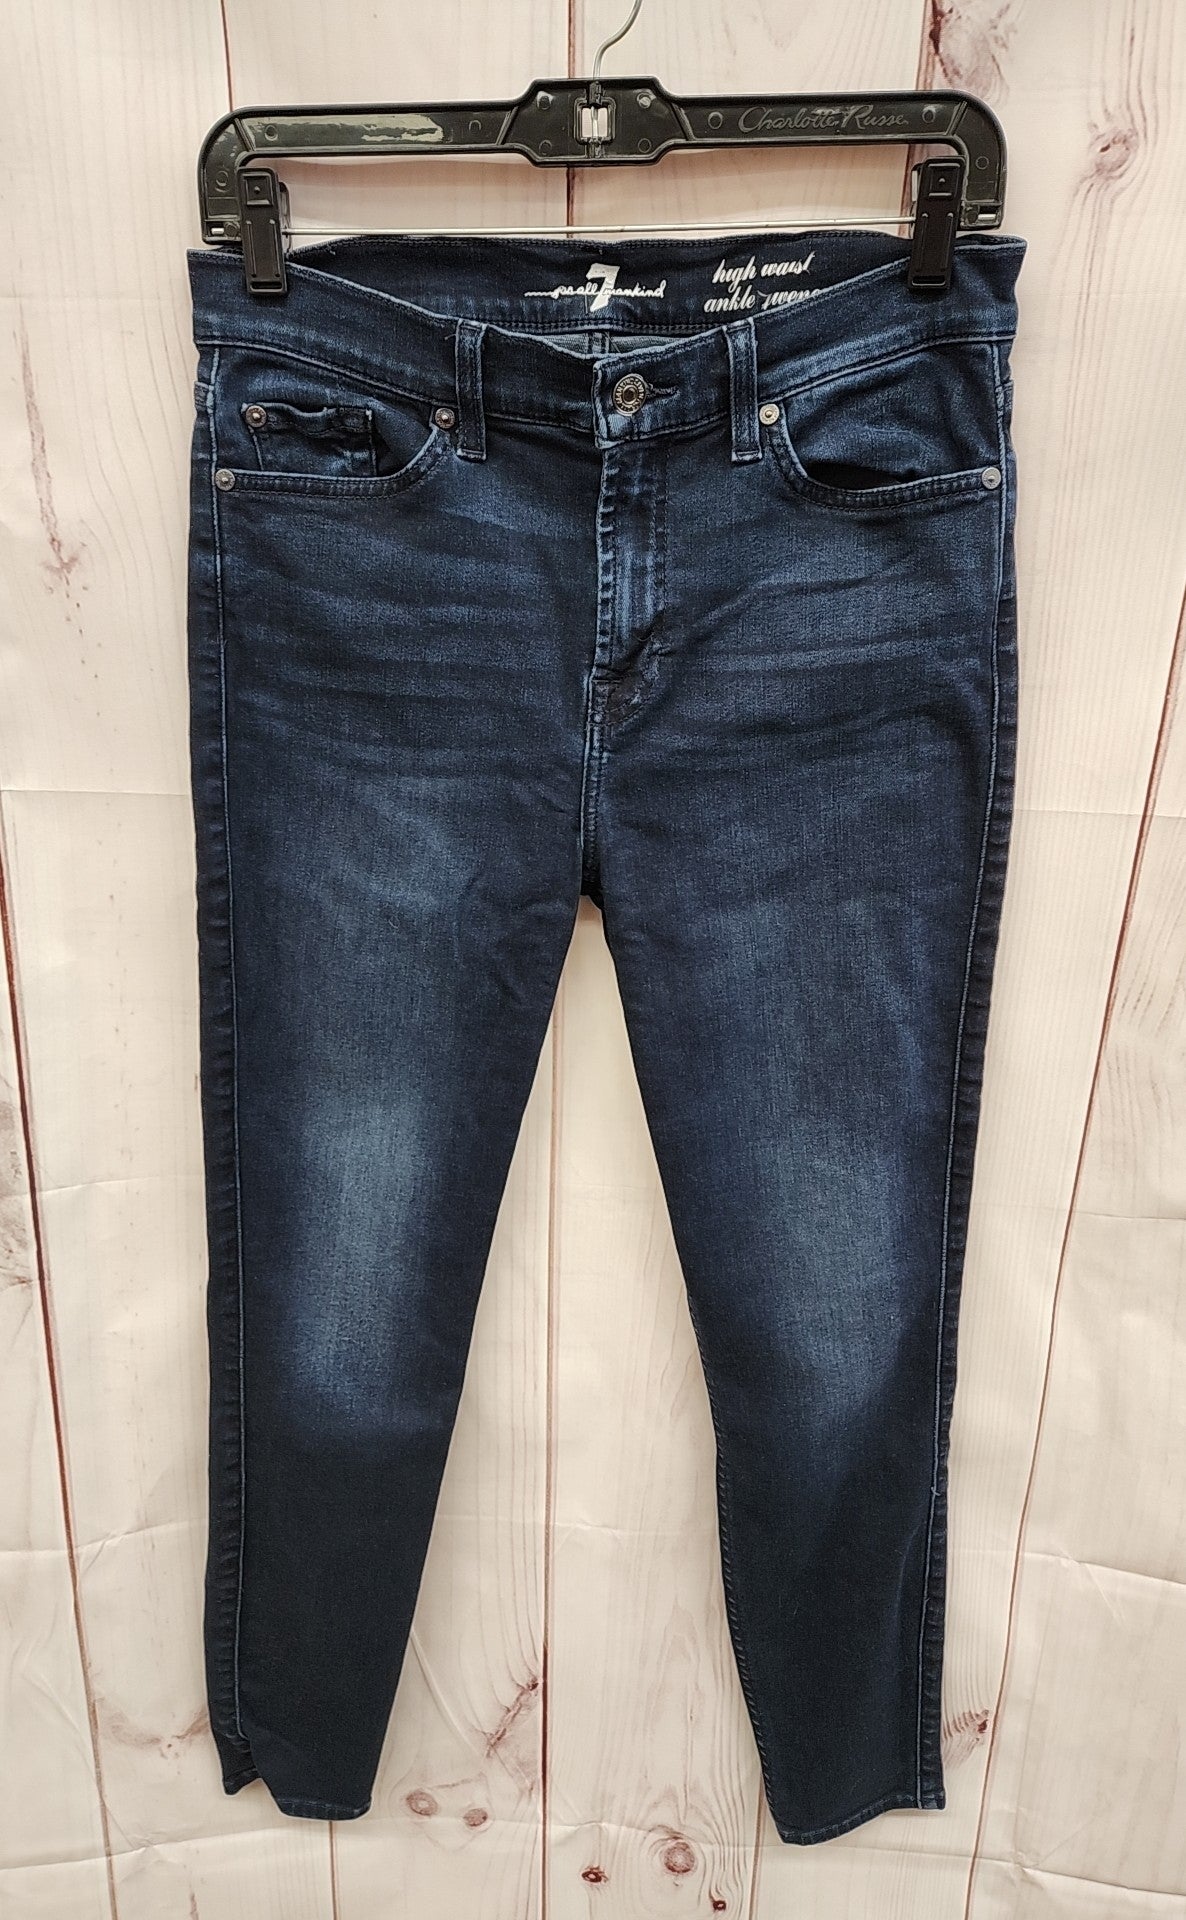 7 For All Mankind Women's Size 29 (7-8) High Rise Ankle Gwenevere Blue Jeans